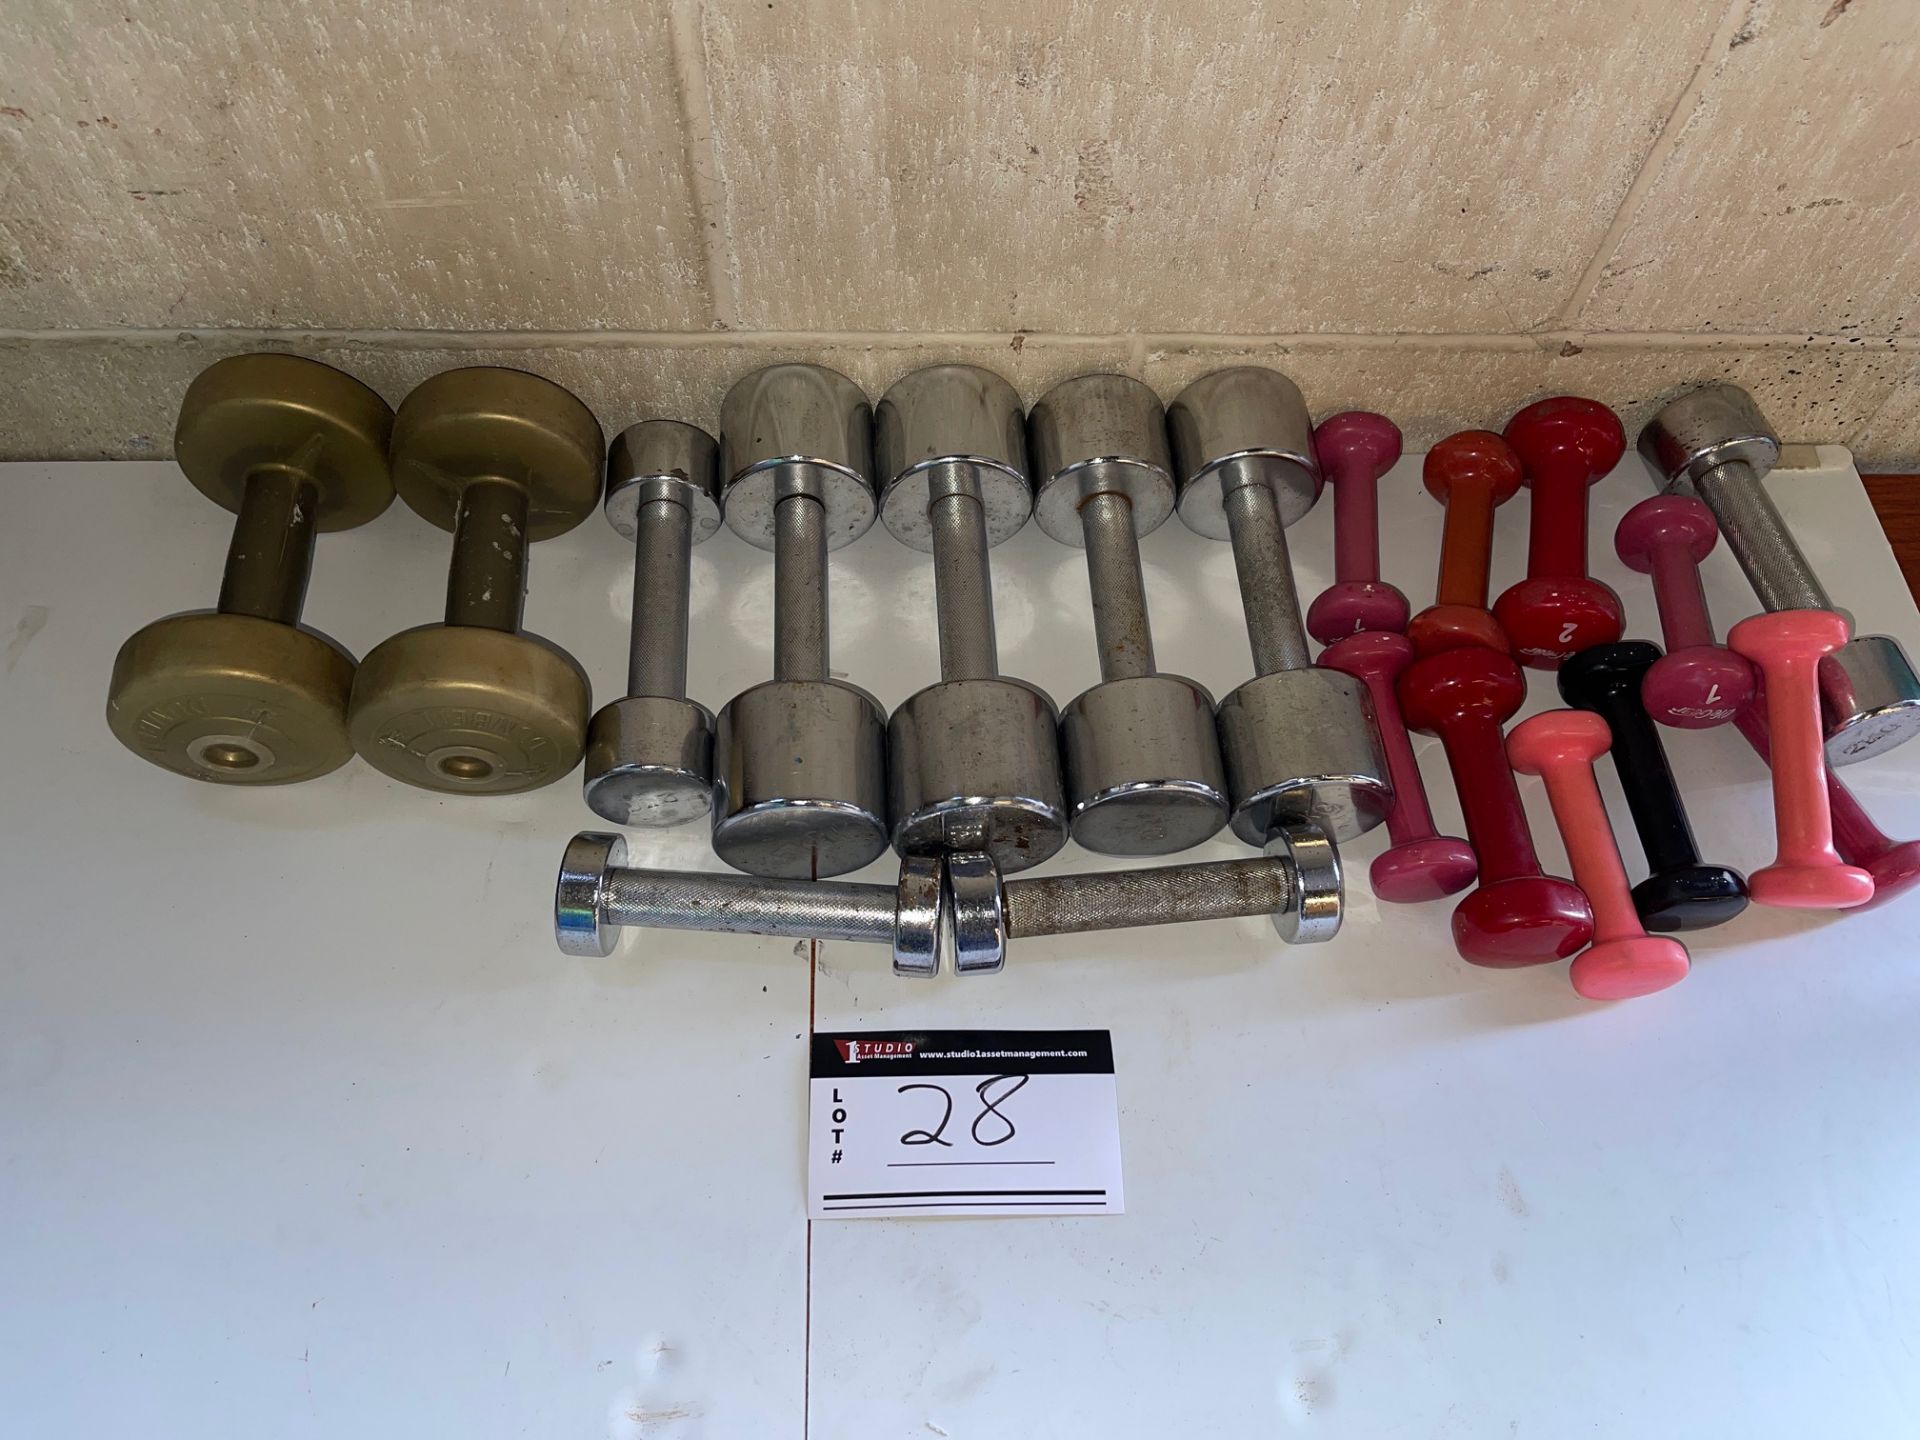 LOT/ASSORTED SIZES LIGHT WEIGHT DUMBBELLS - Image 2 of 3